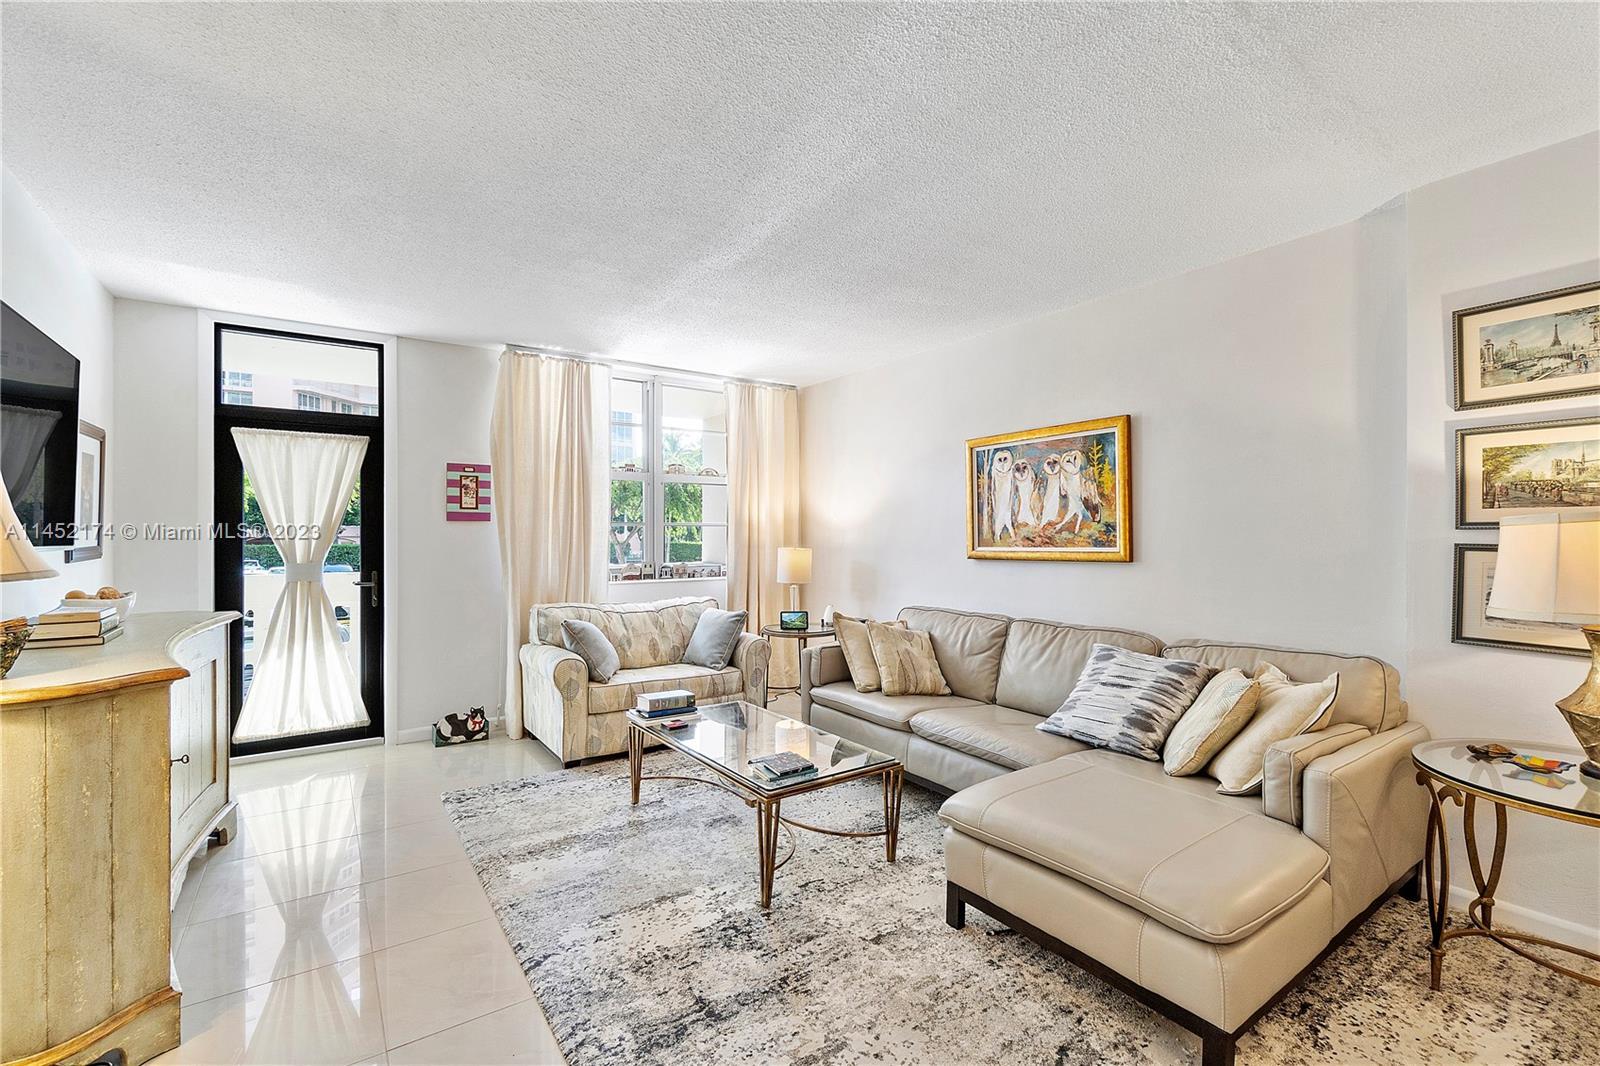 Photo of 90 Edgewater Dr #116 in Coral Gables, FL